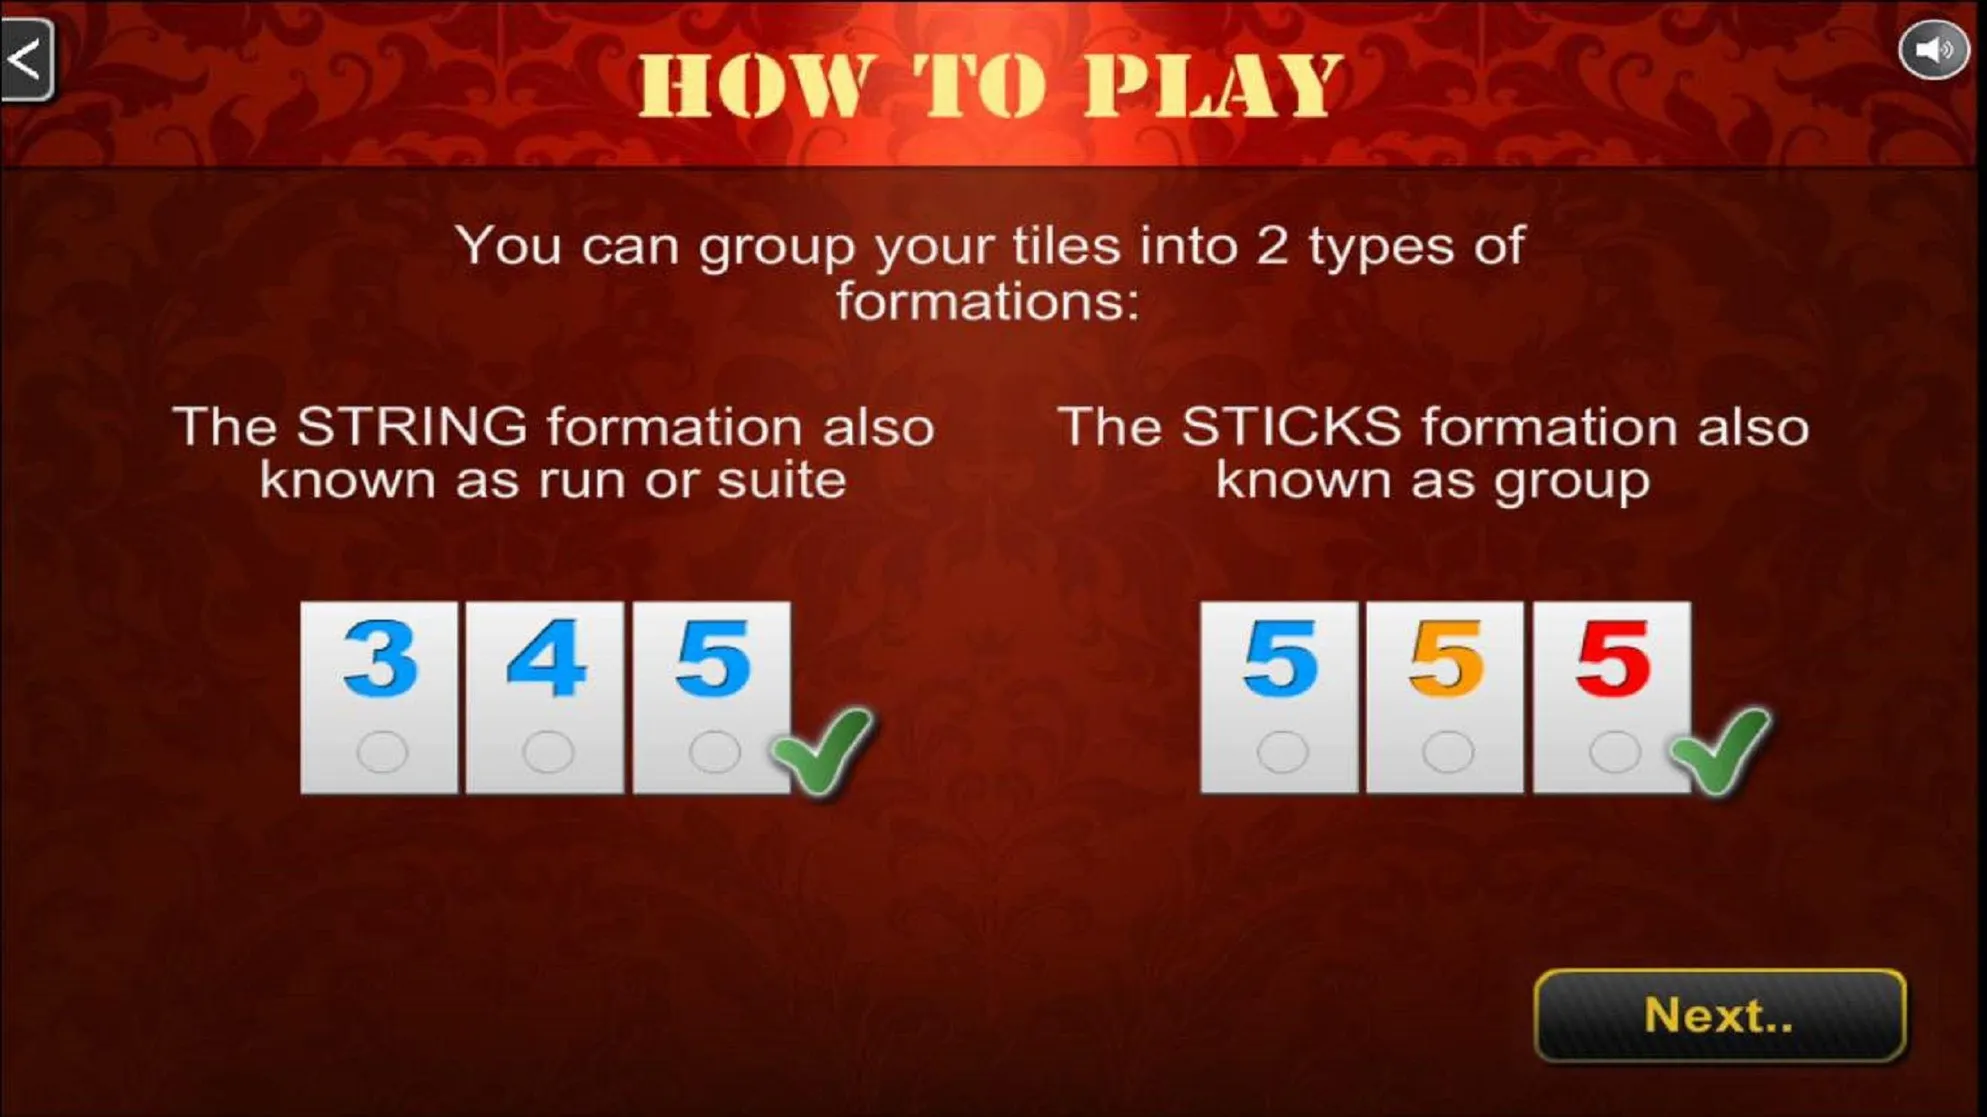 How about 7 card gin rummy rules scoring?